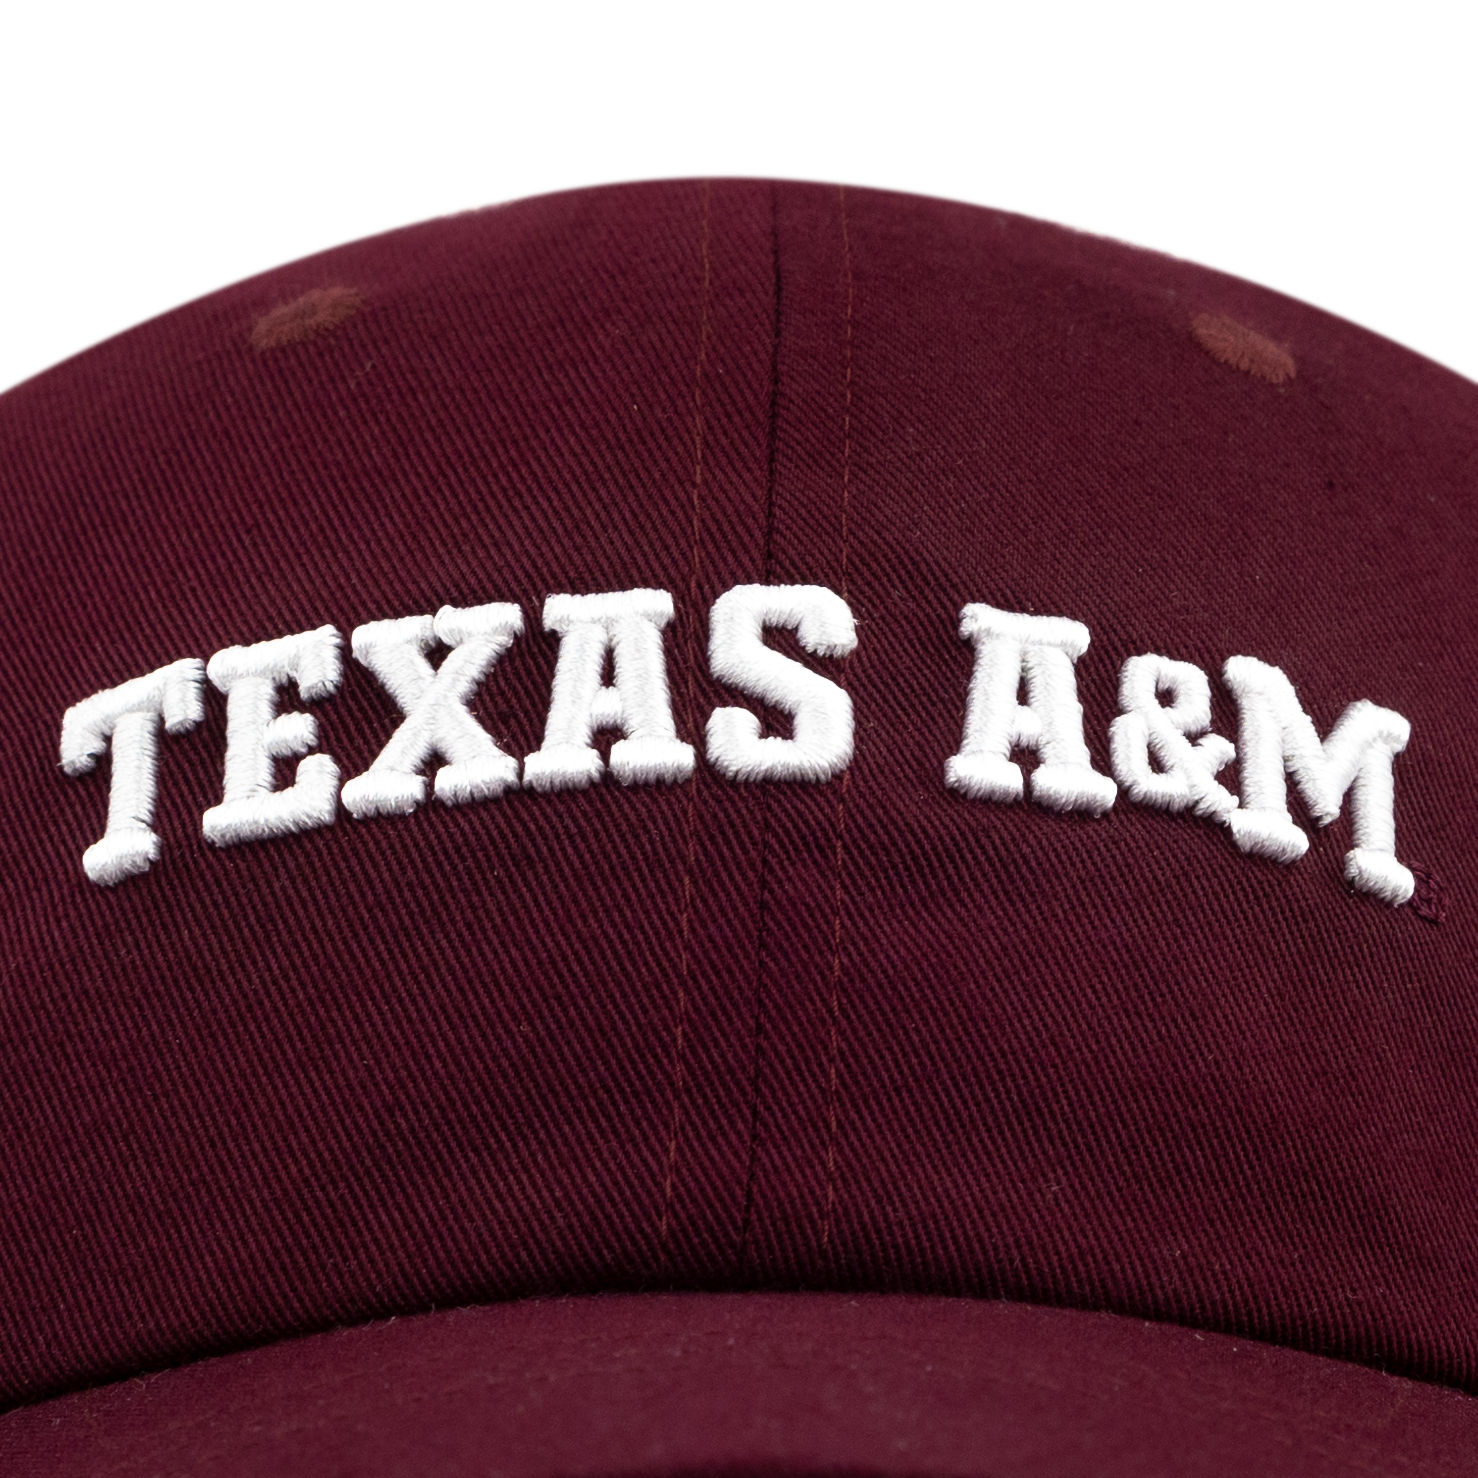 Texas A&M Adidas Slouch Adjustable Hat